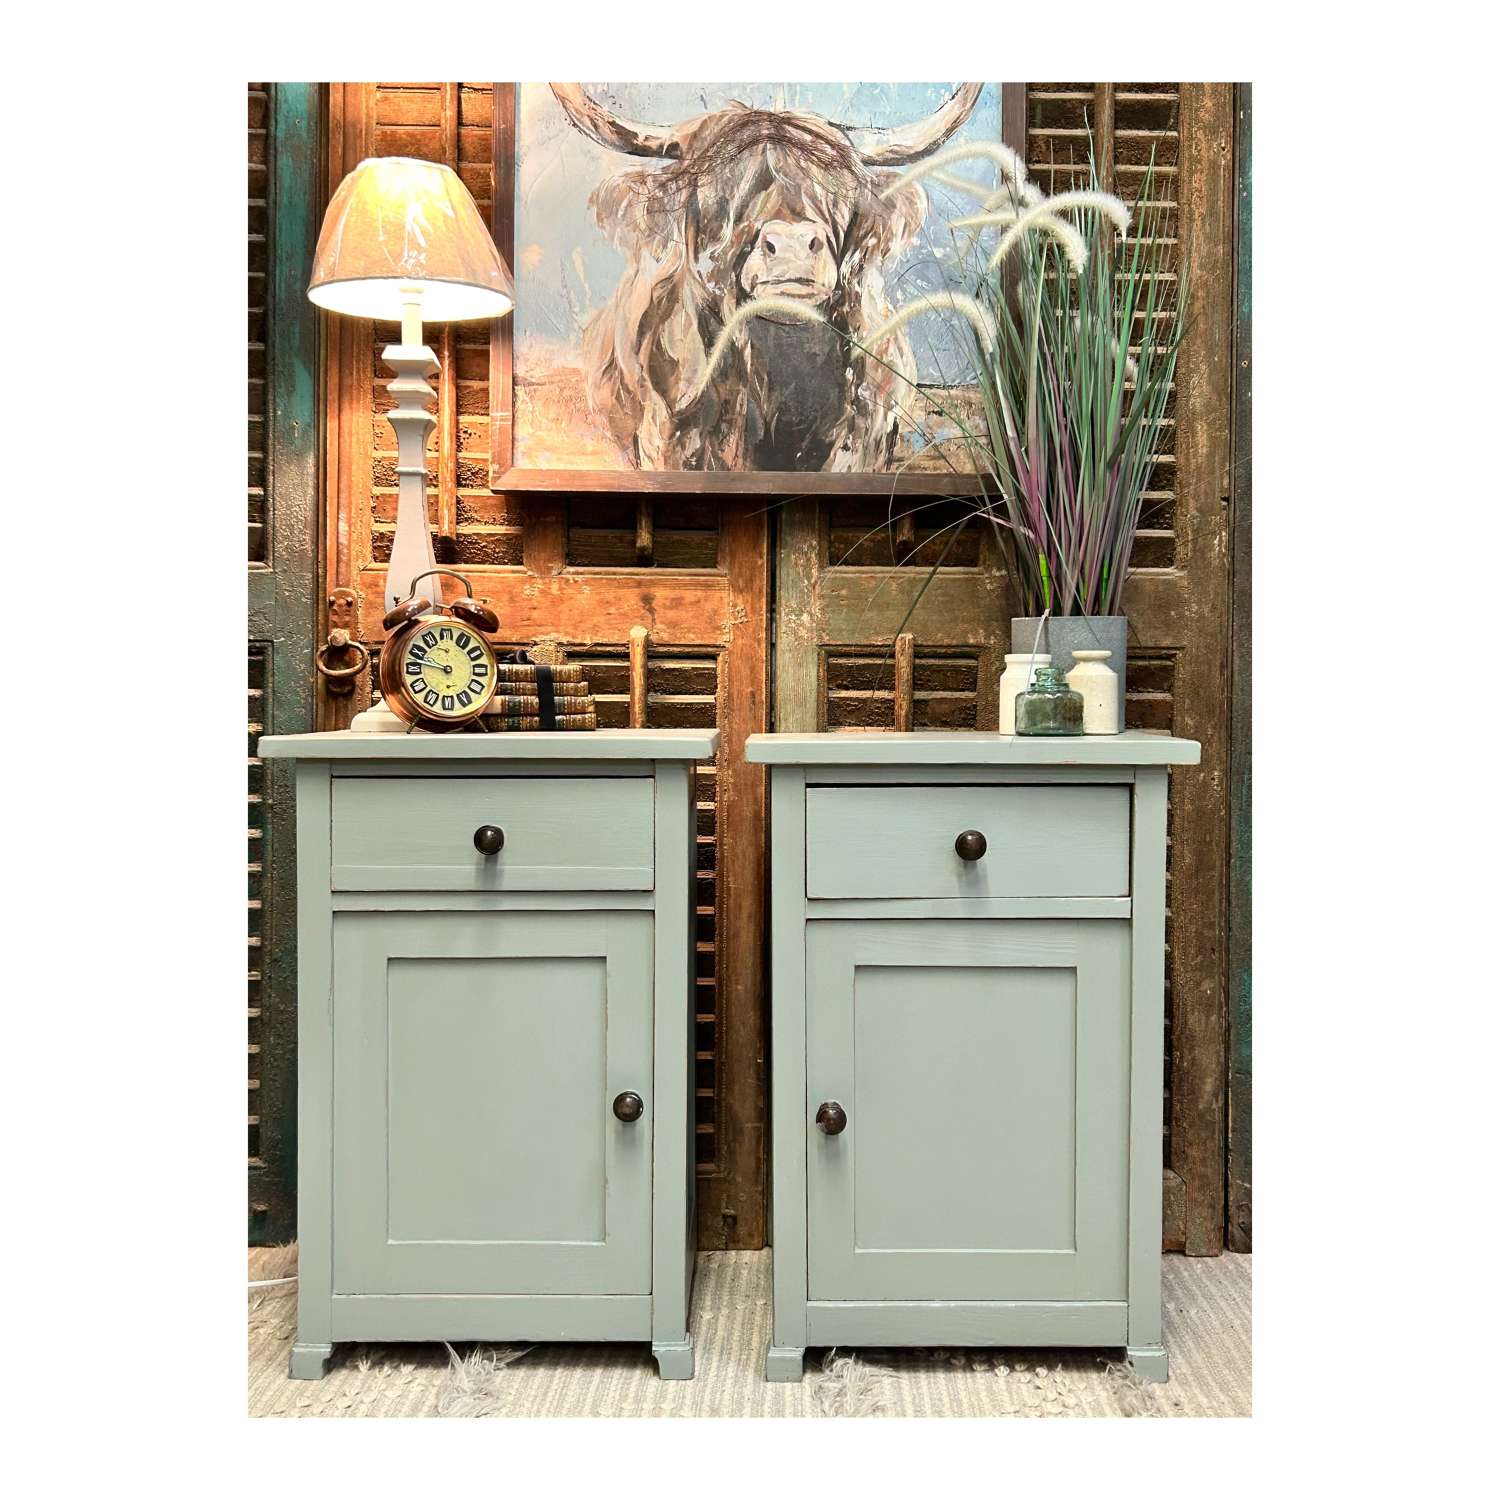 Vintage Shabby Pine Bedside Cabinets in Pigeon